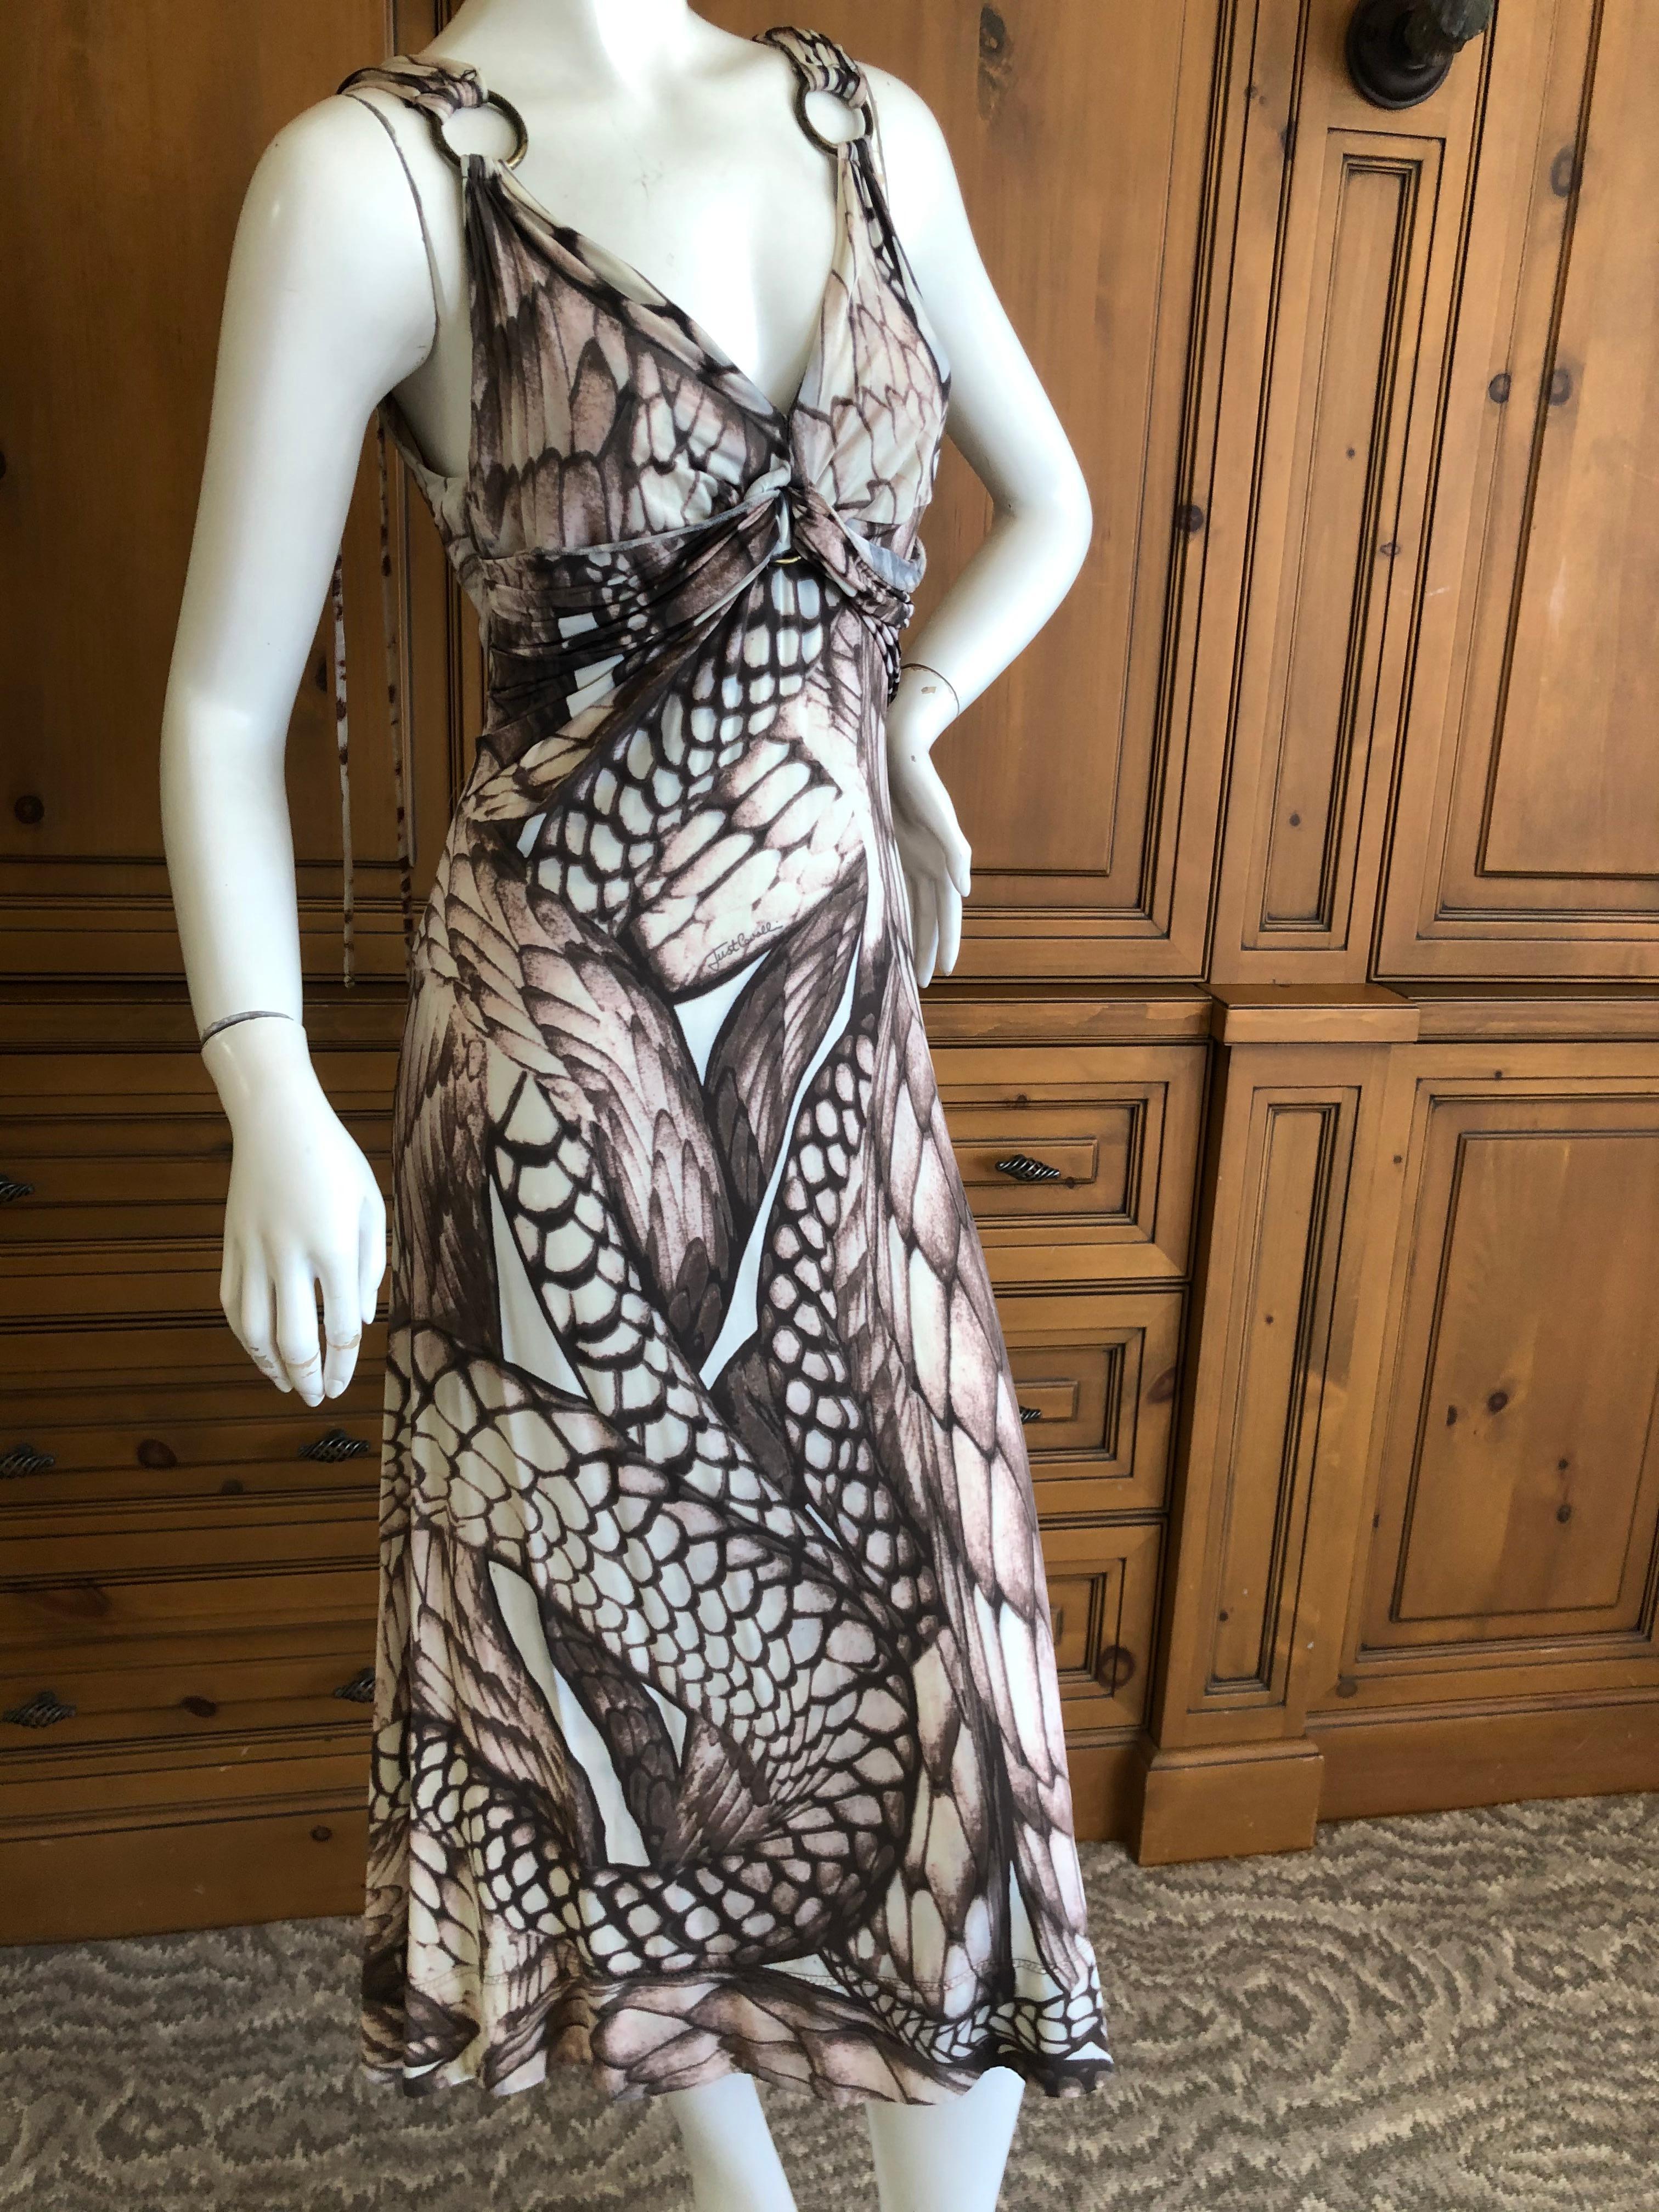 Roberto Cavalli for Just Cavalli Sexy Snake Print Dress with Brass Rings
 So pretty, please use the zoom feature to see details.
Size 44, there is a lot of stretch.
Bust 36